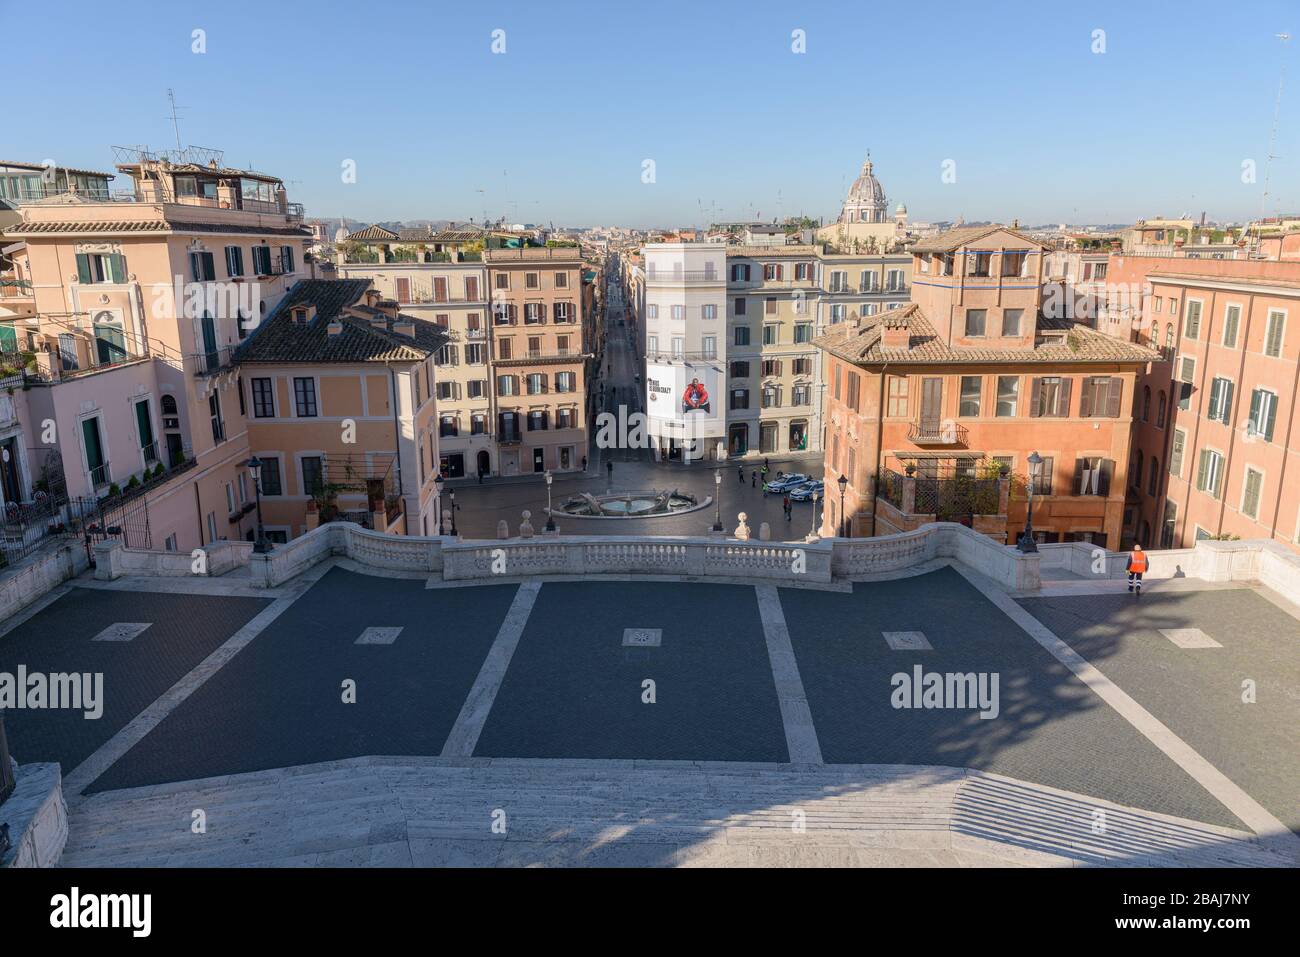 ROME, ITALY - 12 March 2020: A street cleaner climbs down the popular Spanish Steps, deserted today, a rare sight in Rome, Italy. The Italian governme Stock Photo